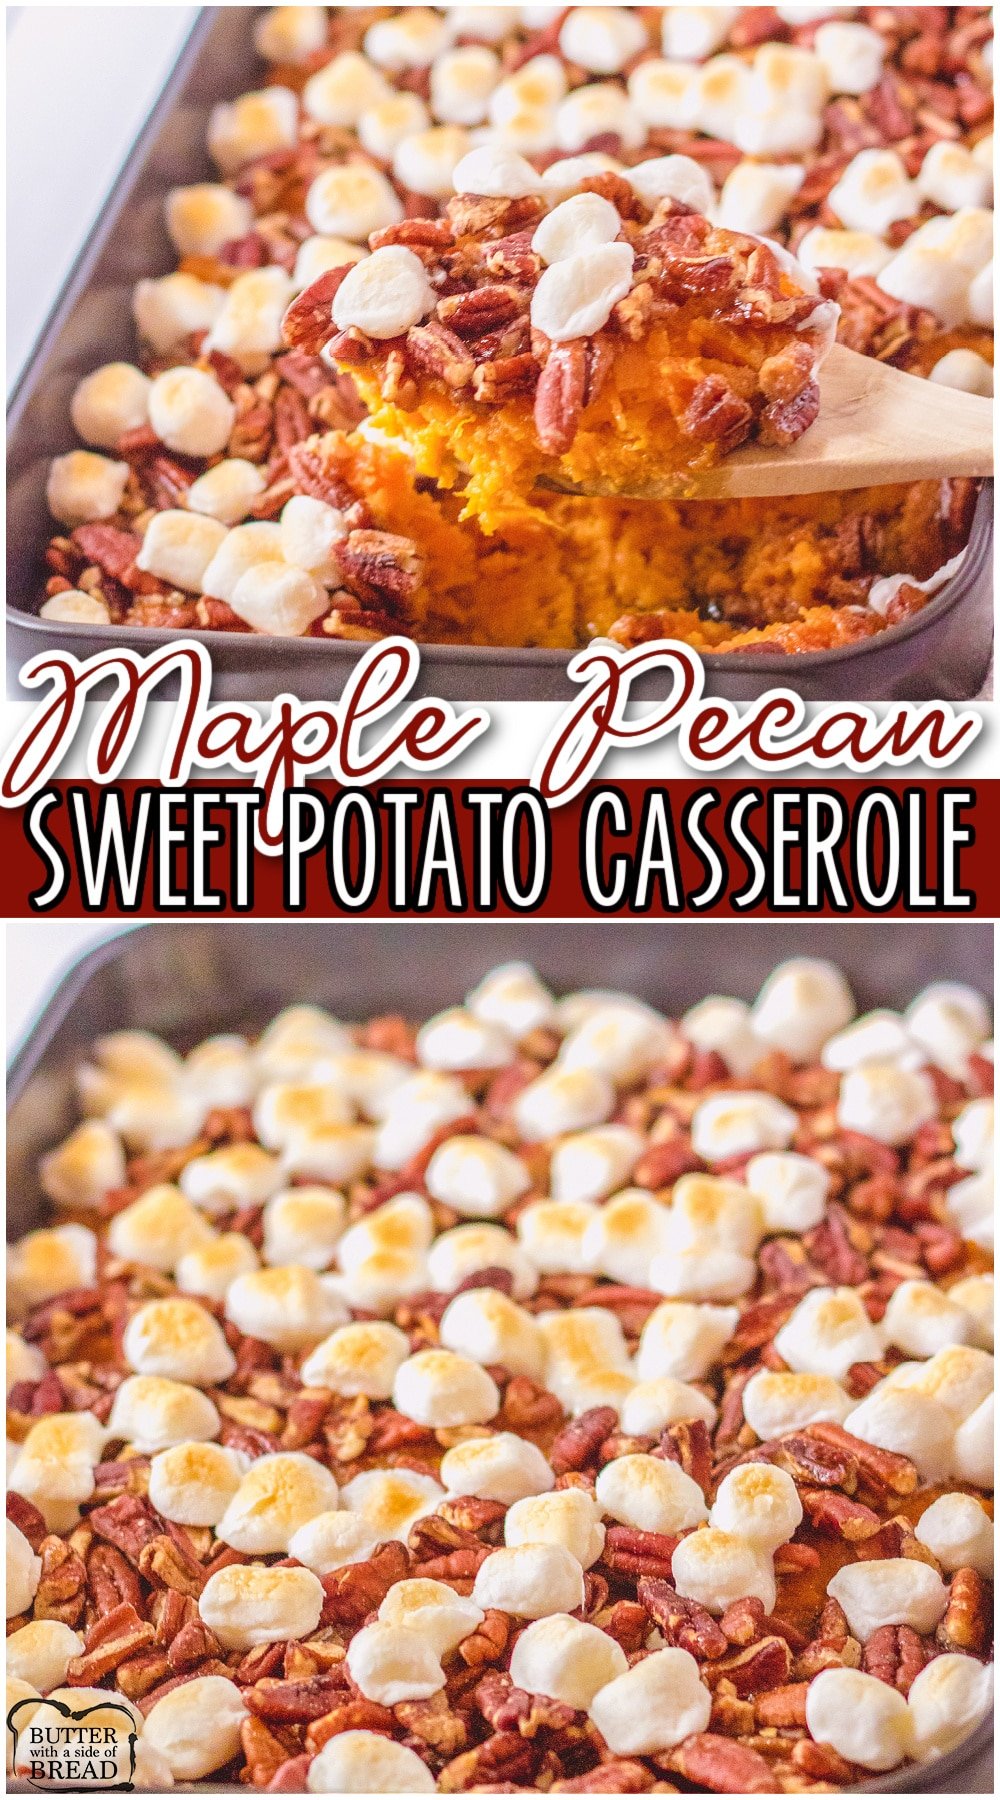 Maple Pecan Sweet Potato Casserole made with sweet potatoes, maple syrup, pecans, & marshmallows of course! Classic side dish perfect for holiday tables, feasts, and indulgent weeknight meals.